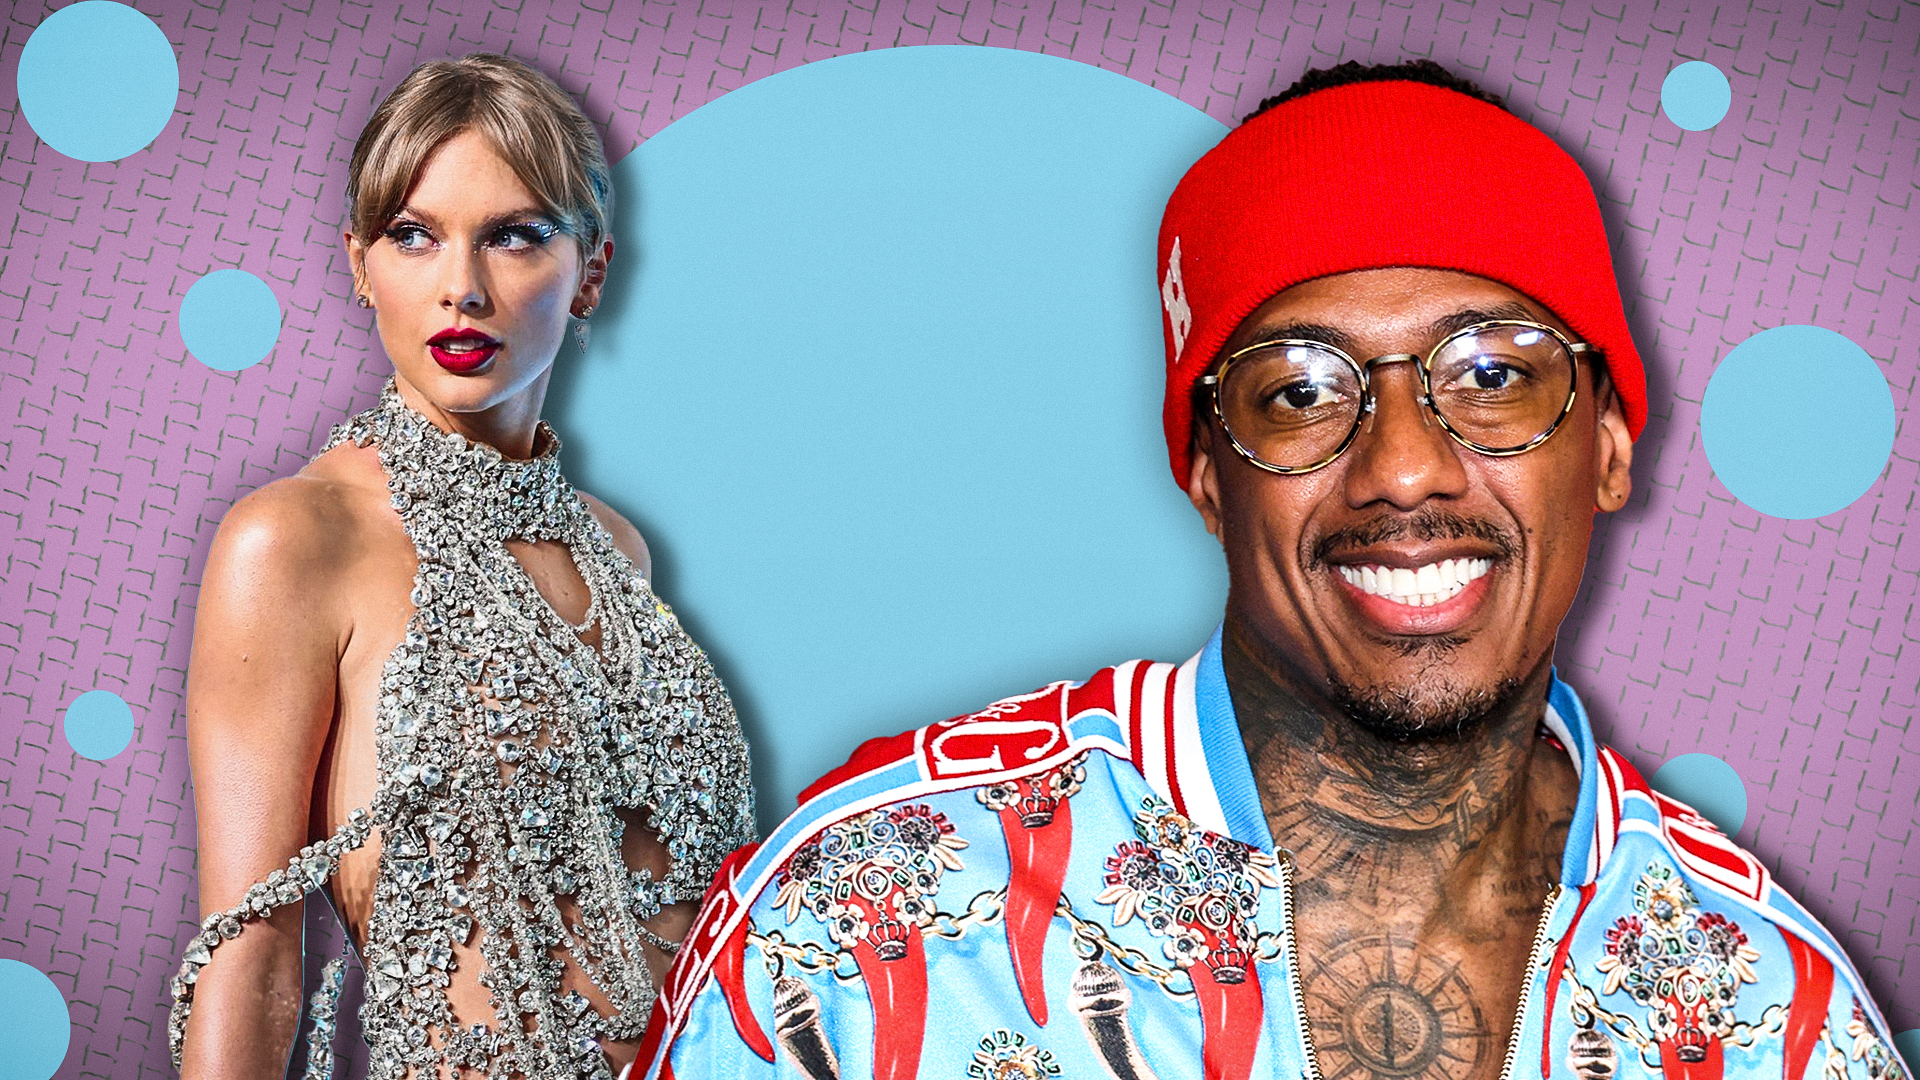 Nick Cannon reveals he wants to have baby number 13 with Taylor Swift